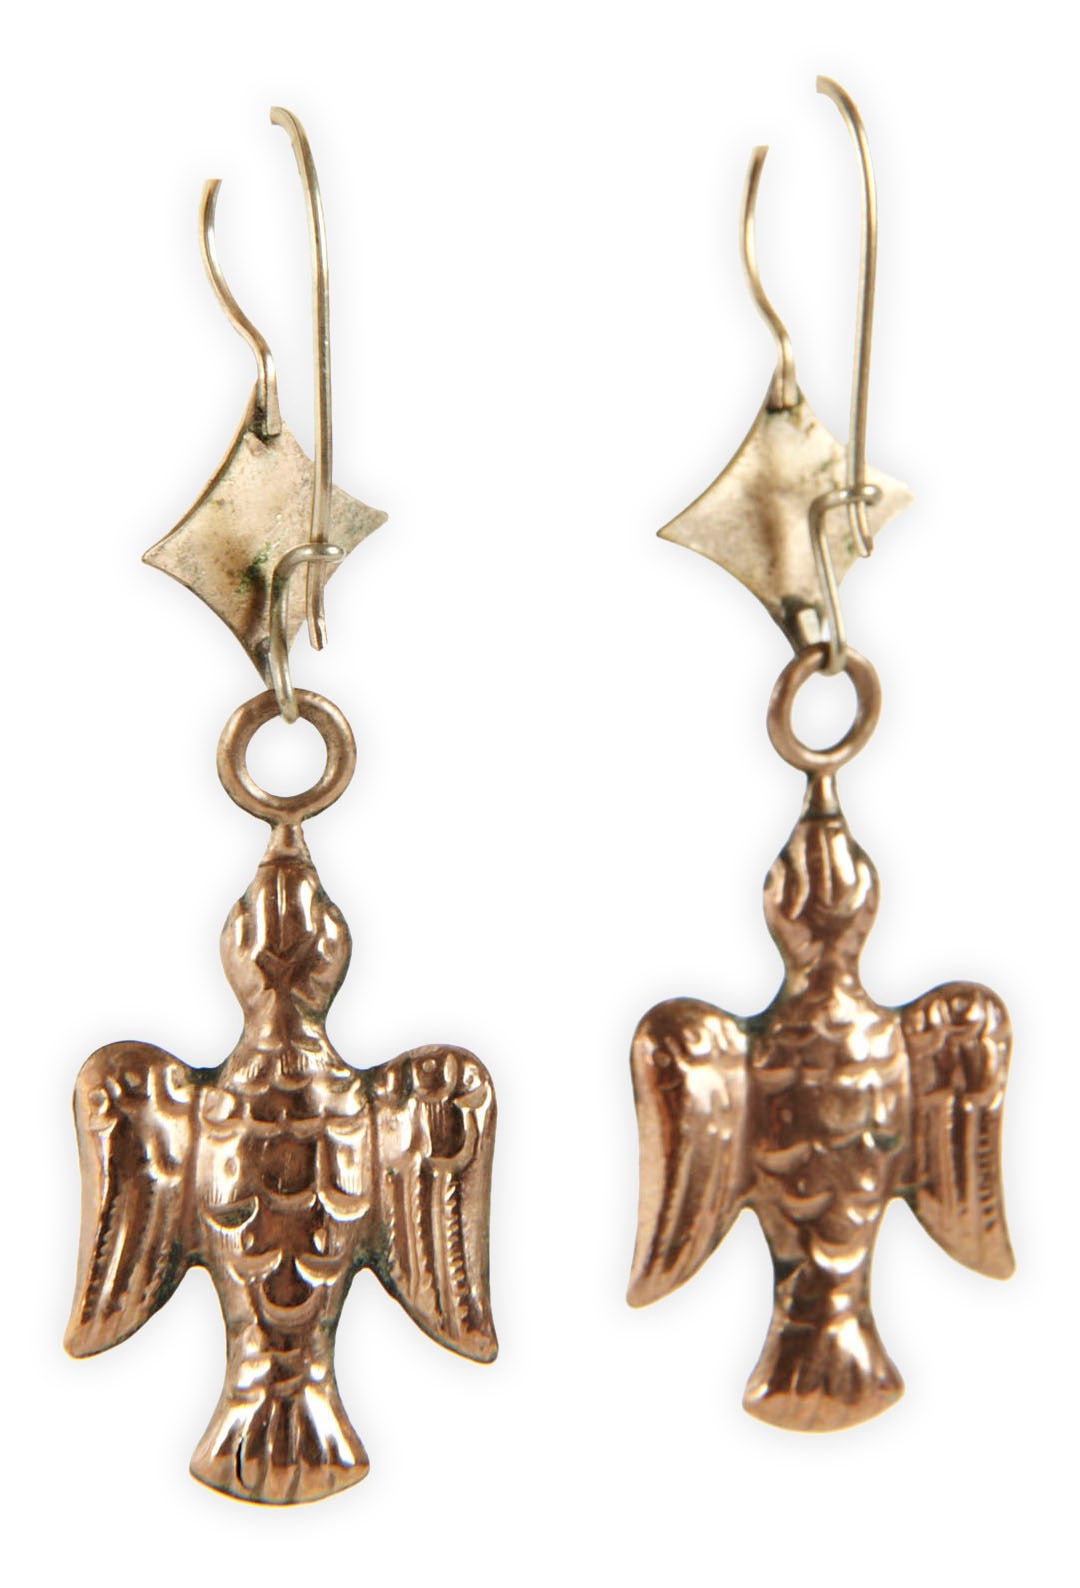 Victorian gold filled earrings with coral cabochons and detachable bird form pendants. Figural earrings from the 19th Century are difficult to find.
1.75